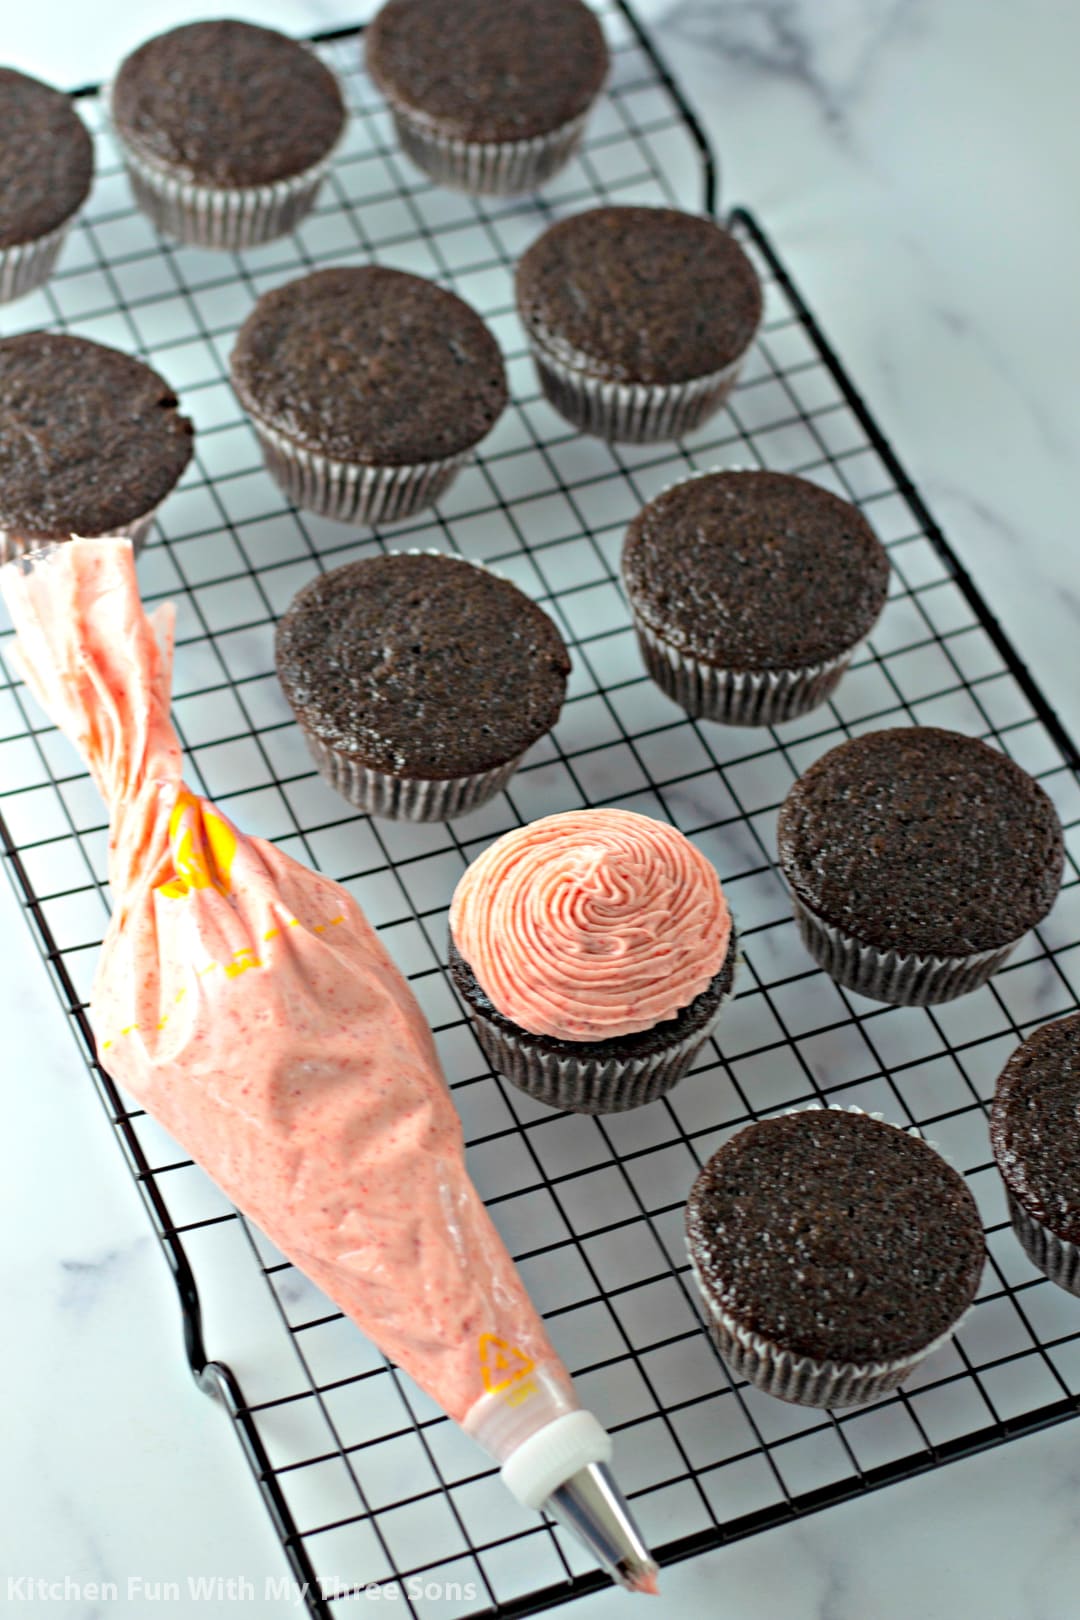 piping strawberry buttercream frosting on chocolate cupcakes